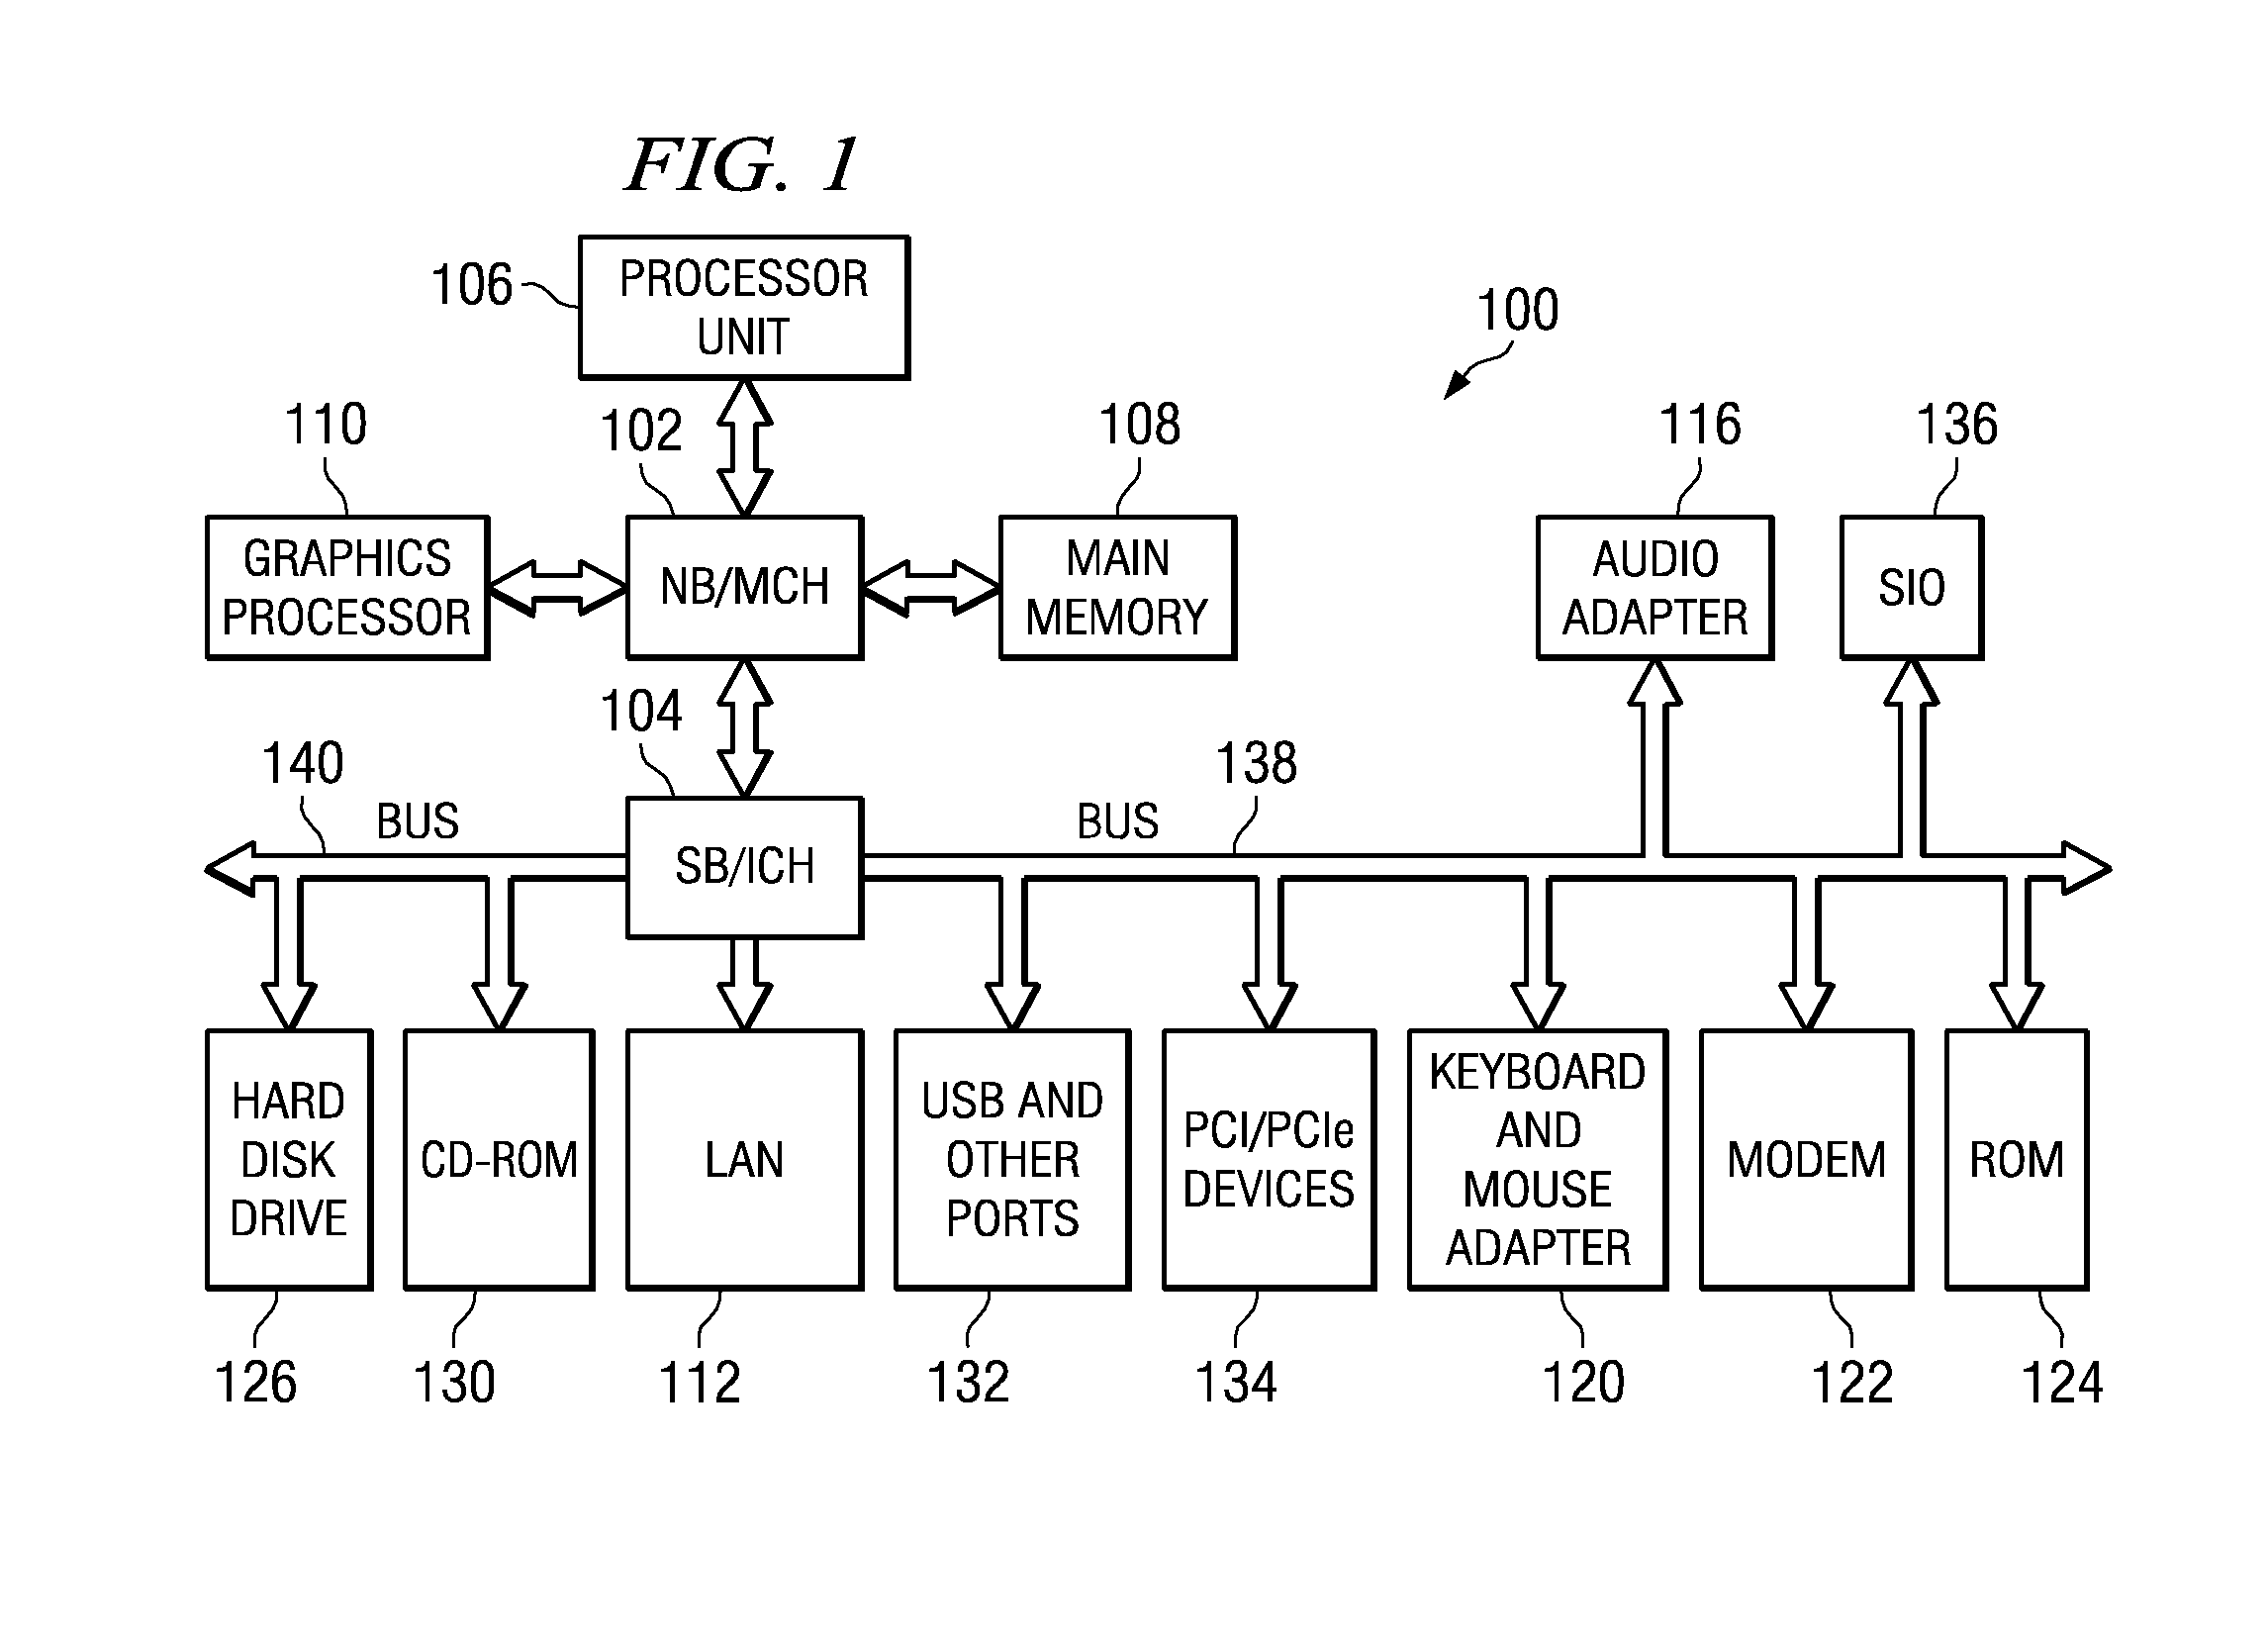 Method to retain critical data in a cache in order to increase application performance